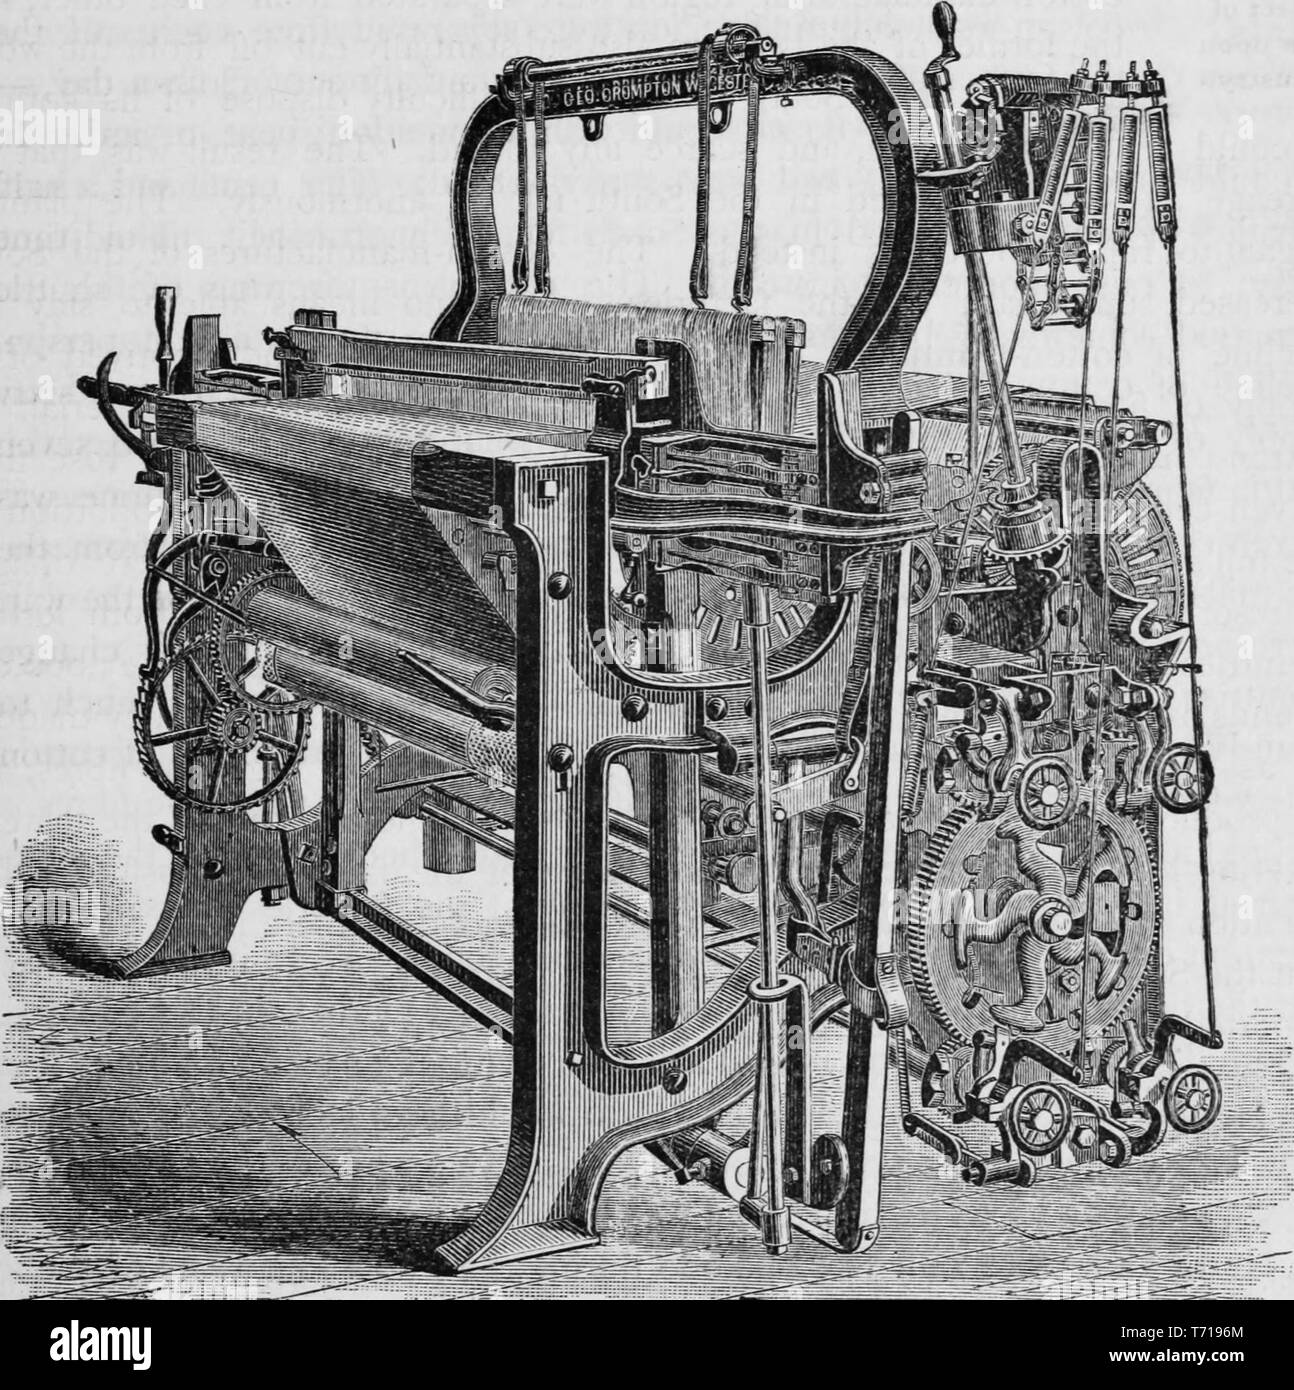 Engraving of the Gingham loom machine, from the book 'Industrial history of  the United States, from the earliest settlements to the present time' by  Albert Sidney Bolles, 1878. Courtesy Internet Archive Stock